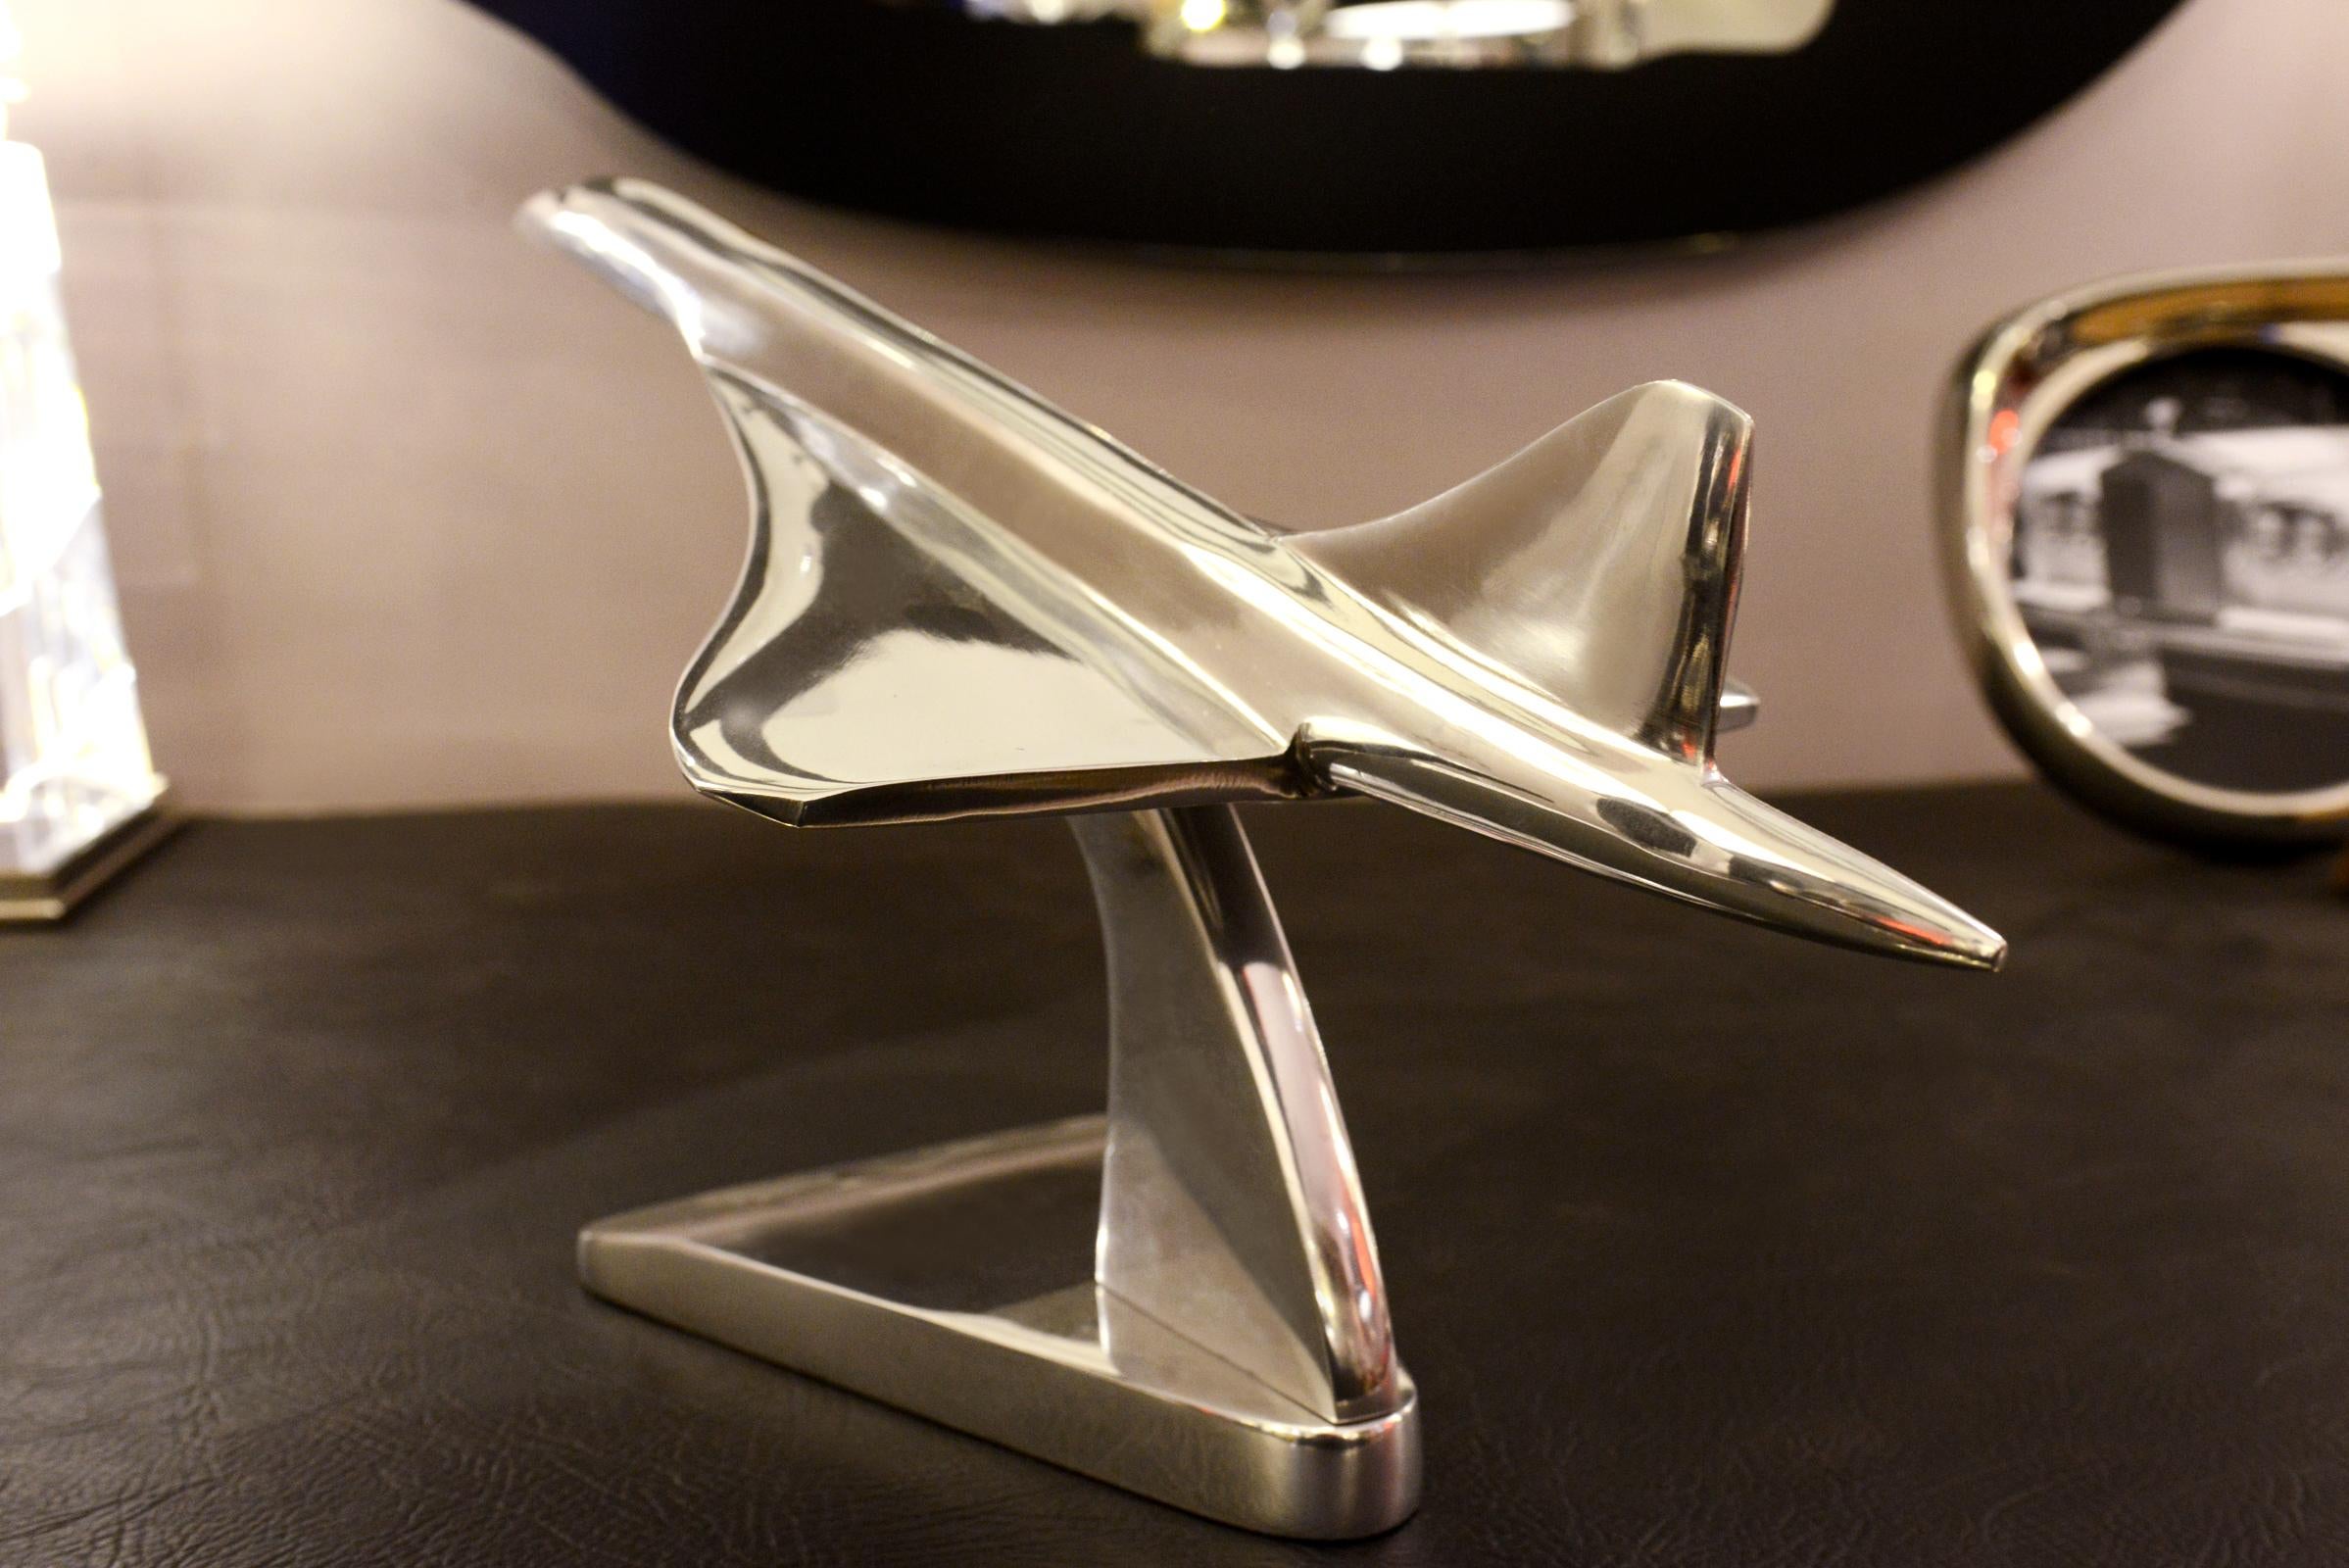 Polished Concorde Model Supersonic Aircraft For Sale